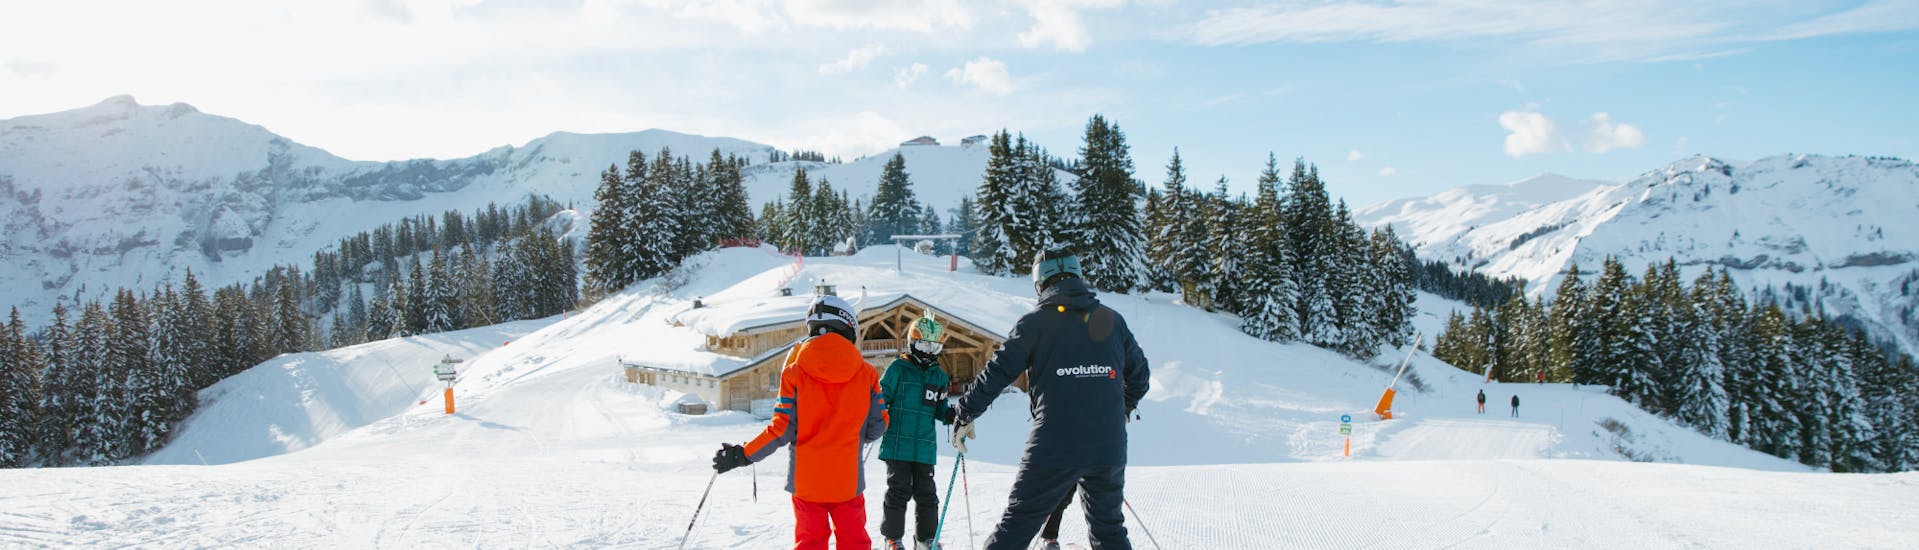 Family enjoying Private Kids Ski Lessons for All Levels (from 4 y.)with Evolution 2 Saint-Gervais.